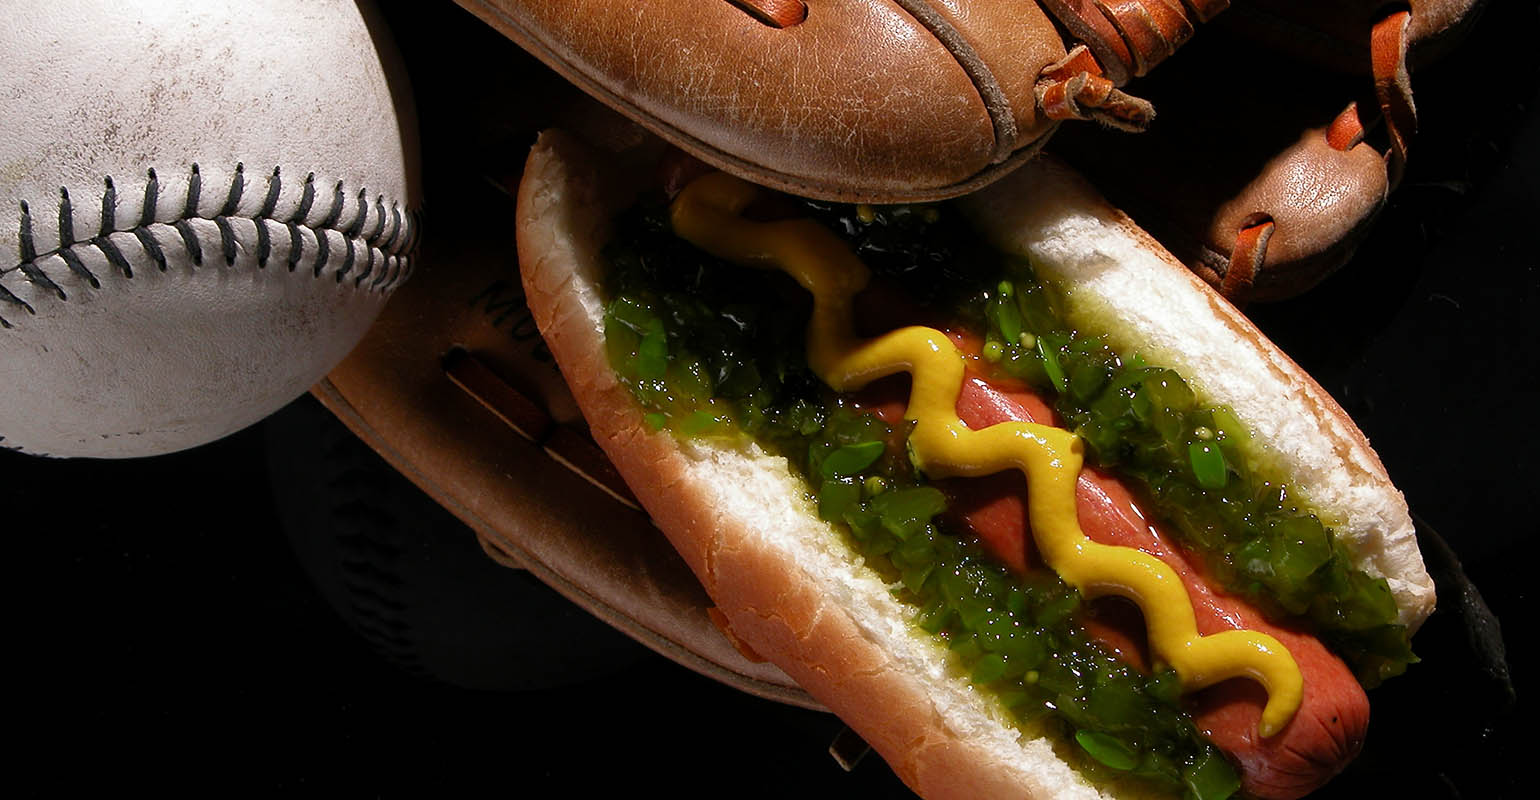 How many hot dogs will you eat at the ballpark this year?